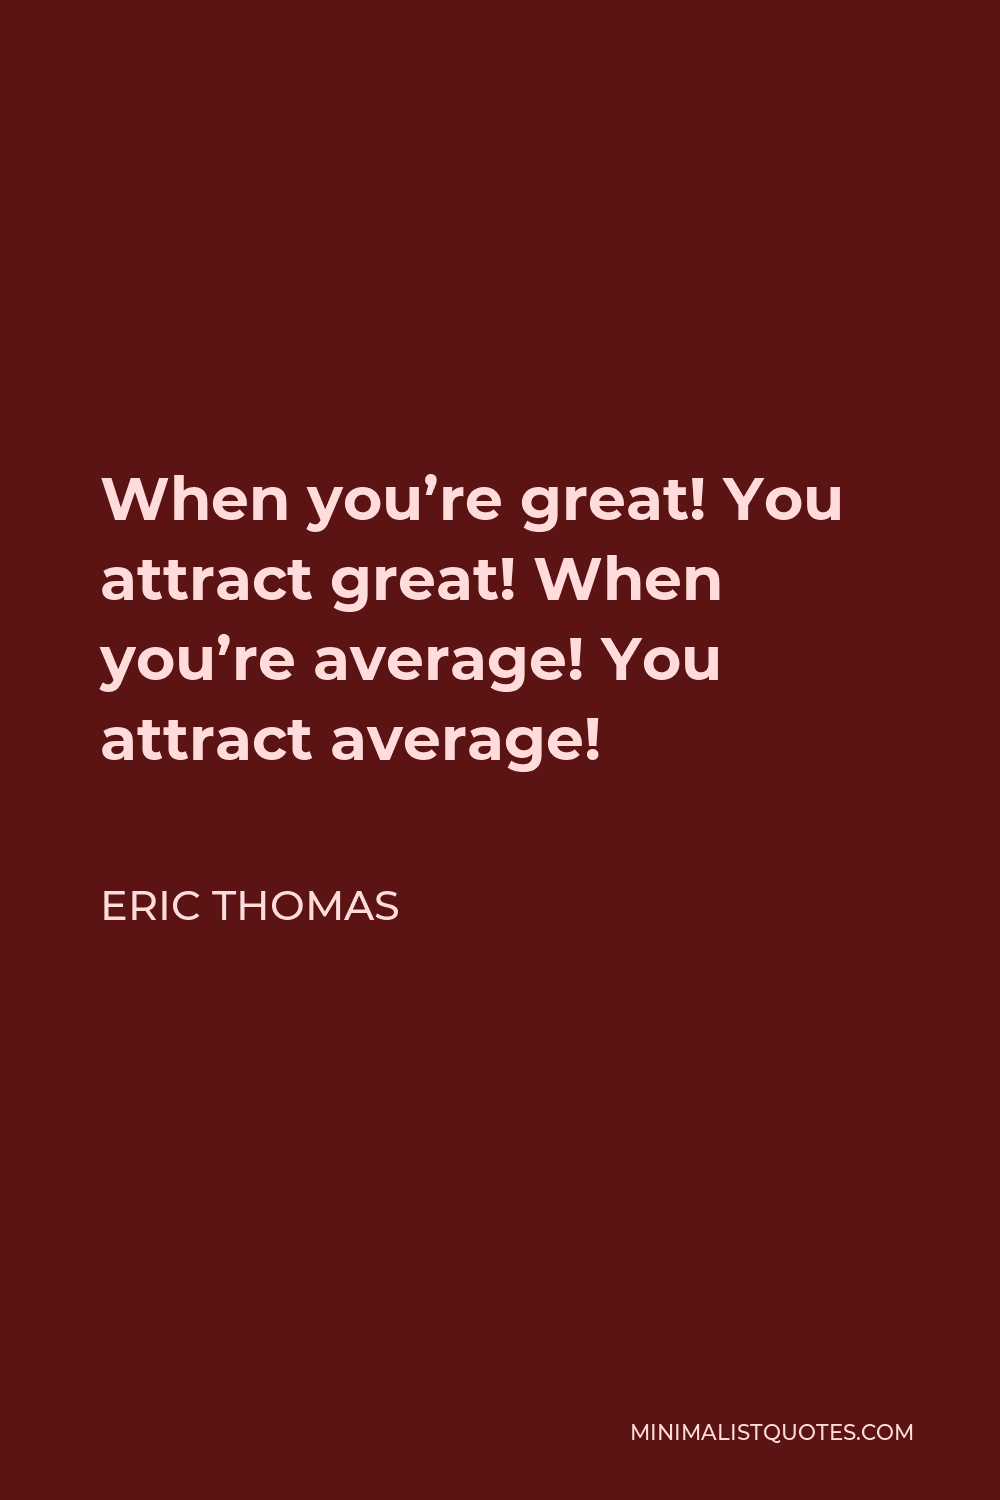 Eric Thomas Quote - When you’re great! You attract great! When you’re average! You attract average!